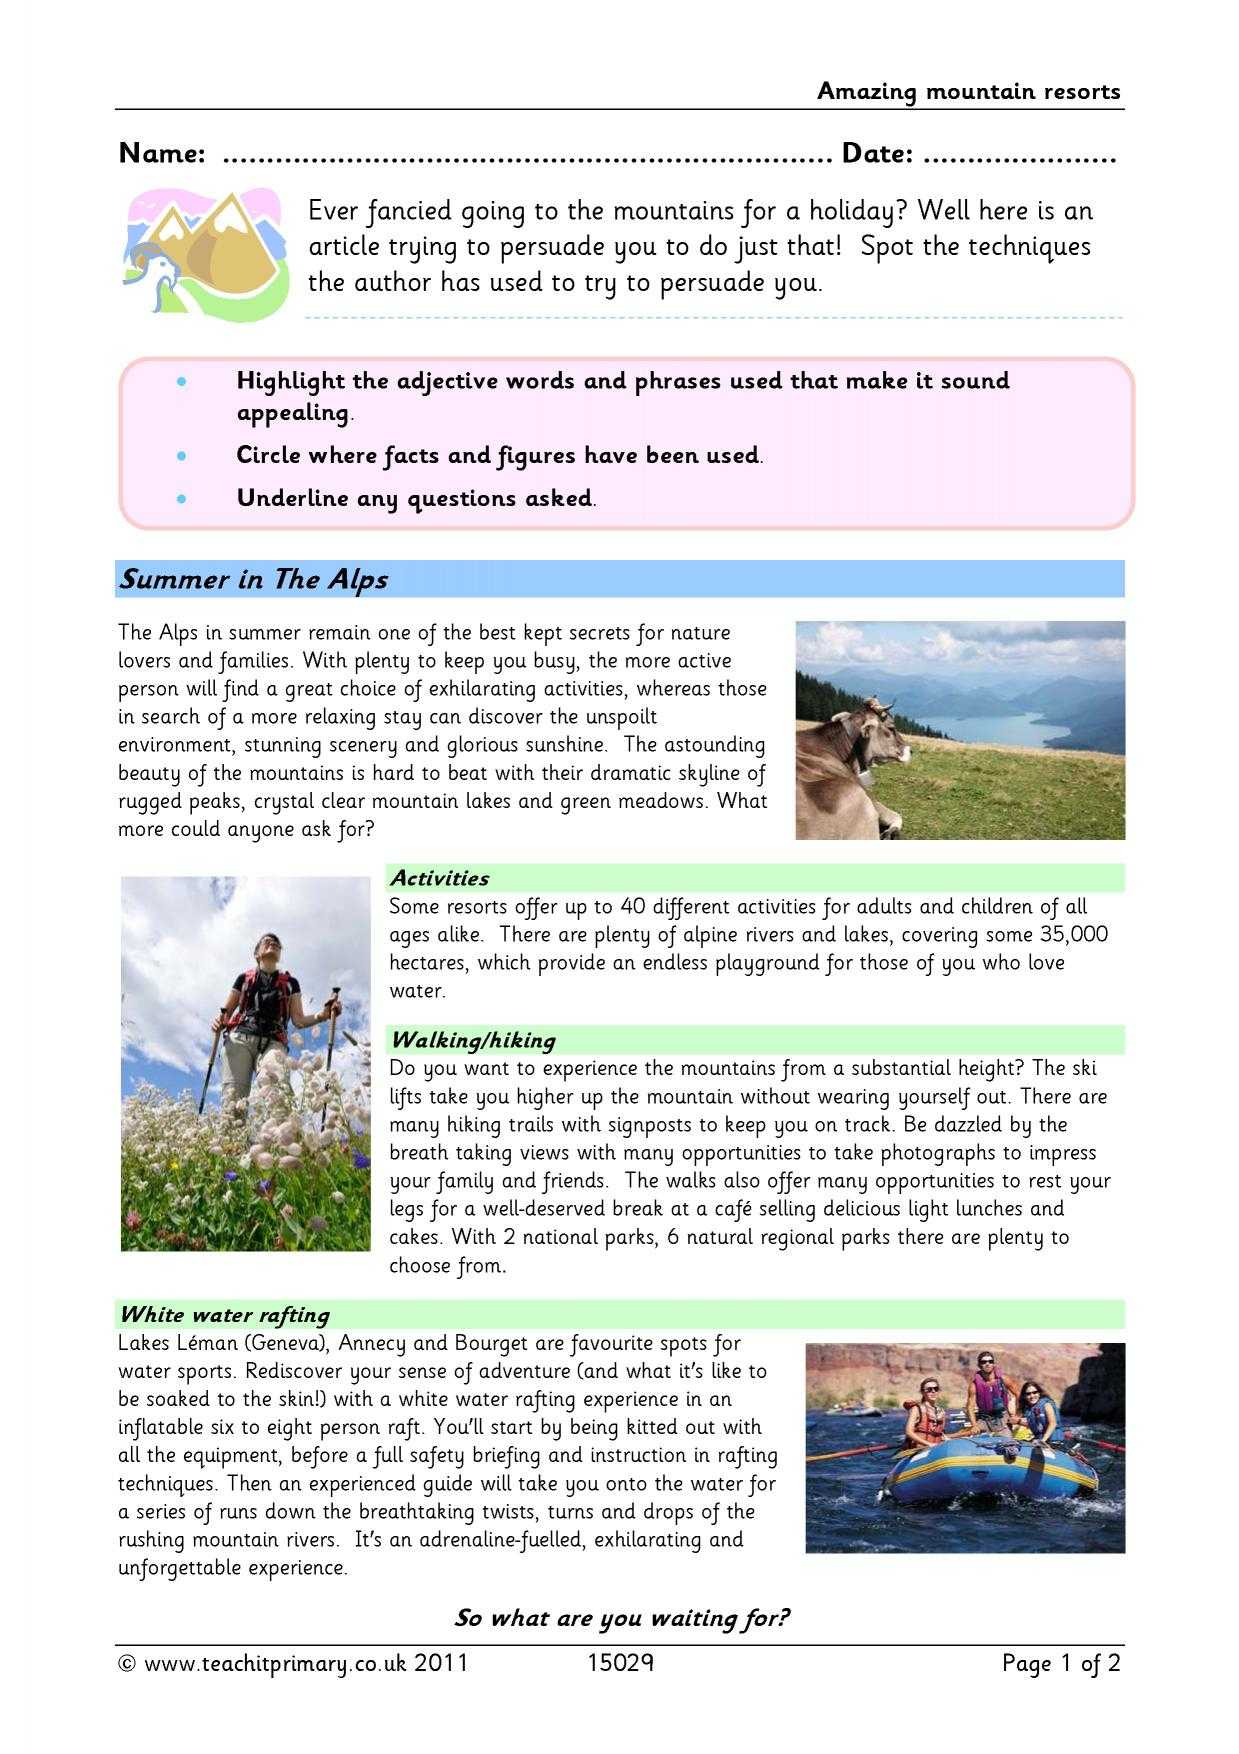 Brochure Writing – Amazing Mountain Resorts Intended For Travel Brochure Template Ks2